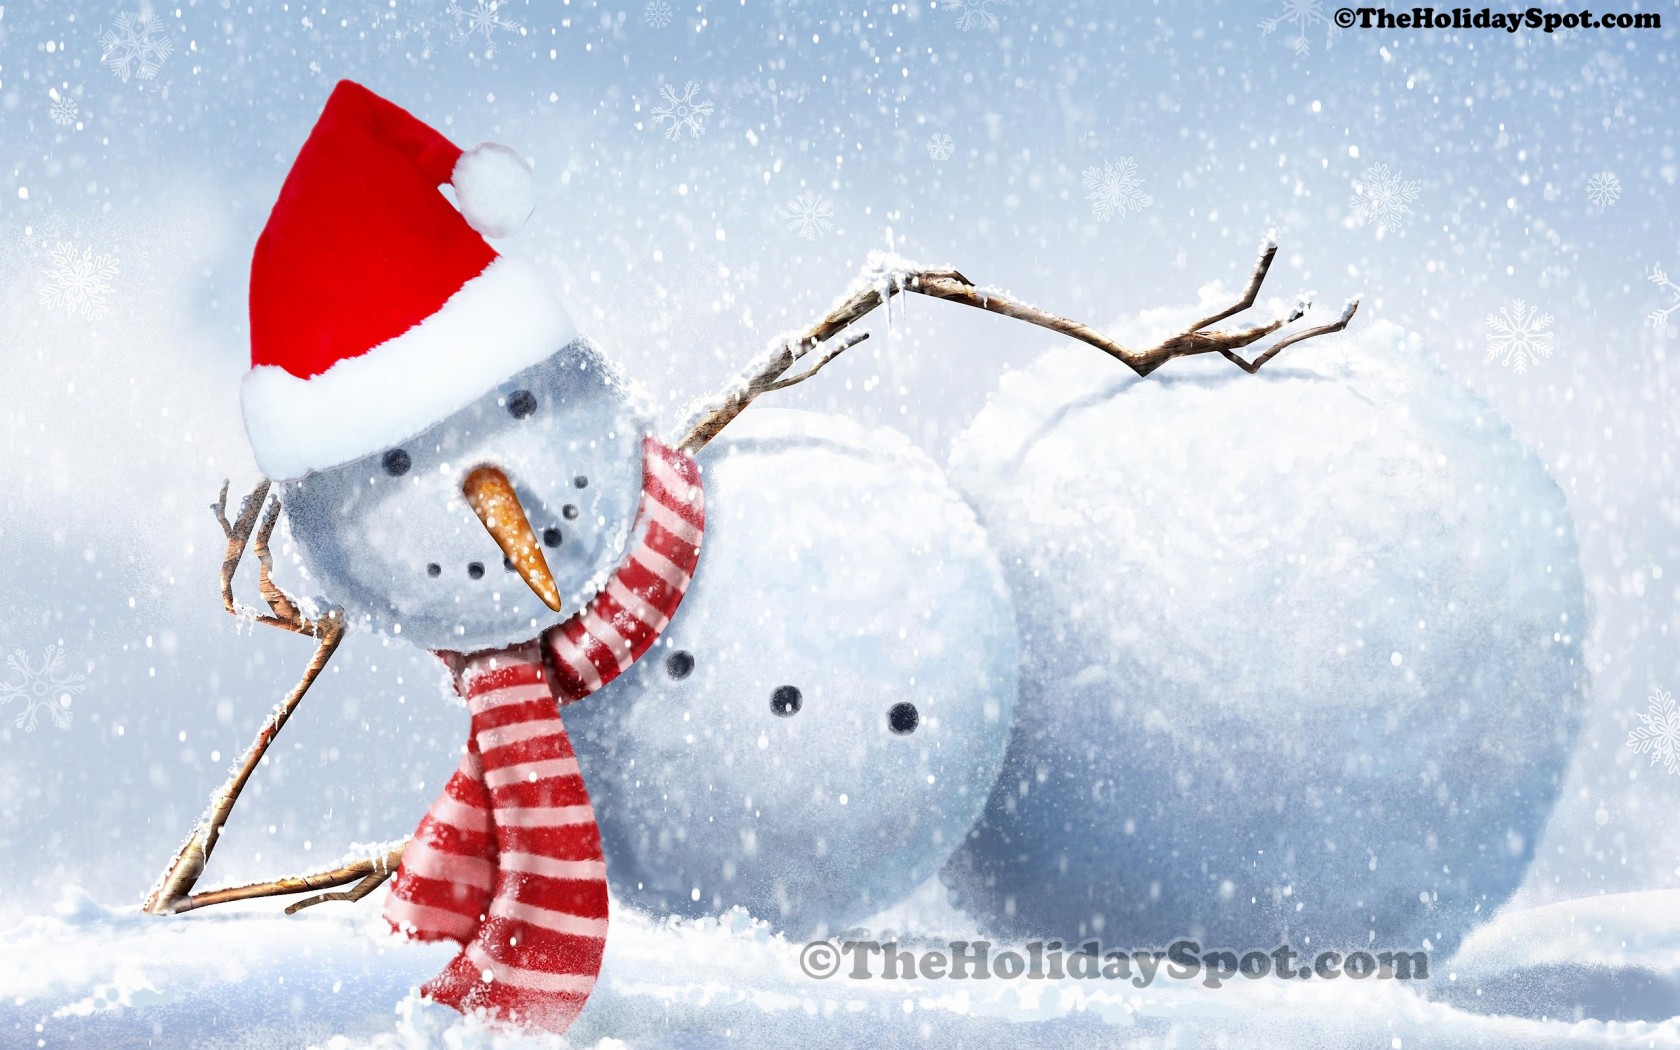 snowman wallpaper or right click the image to save or set as desktop